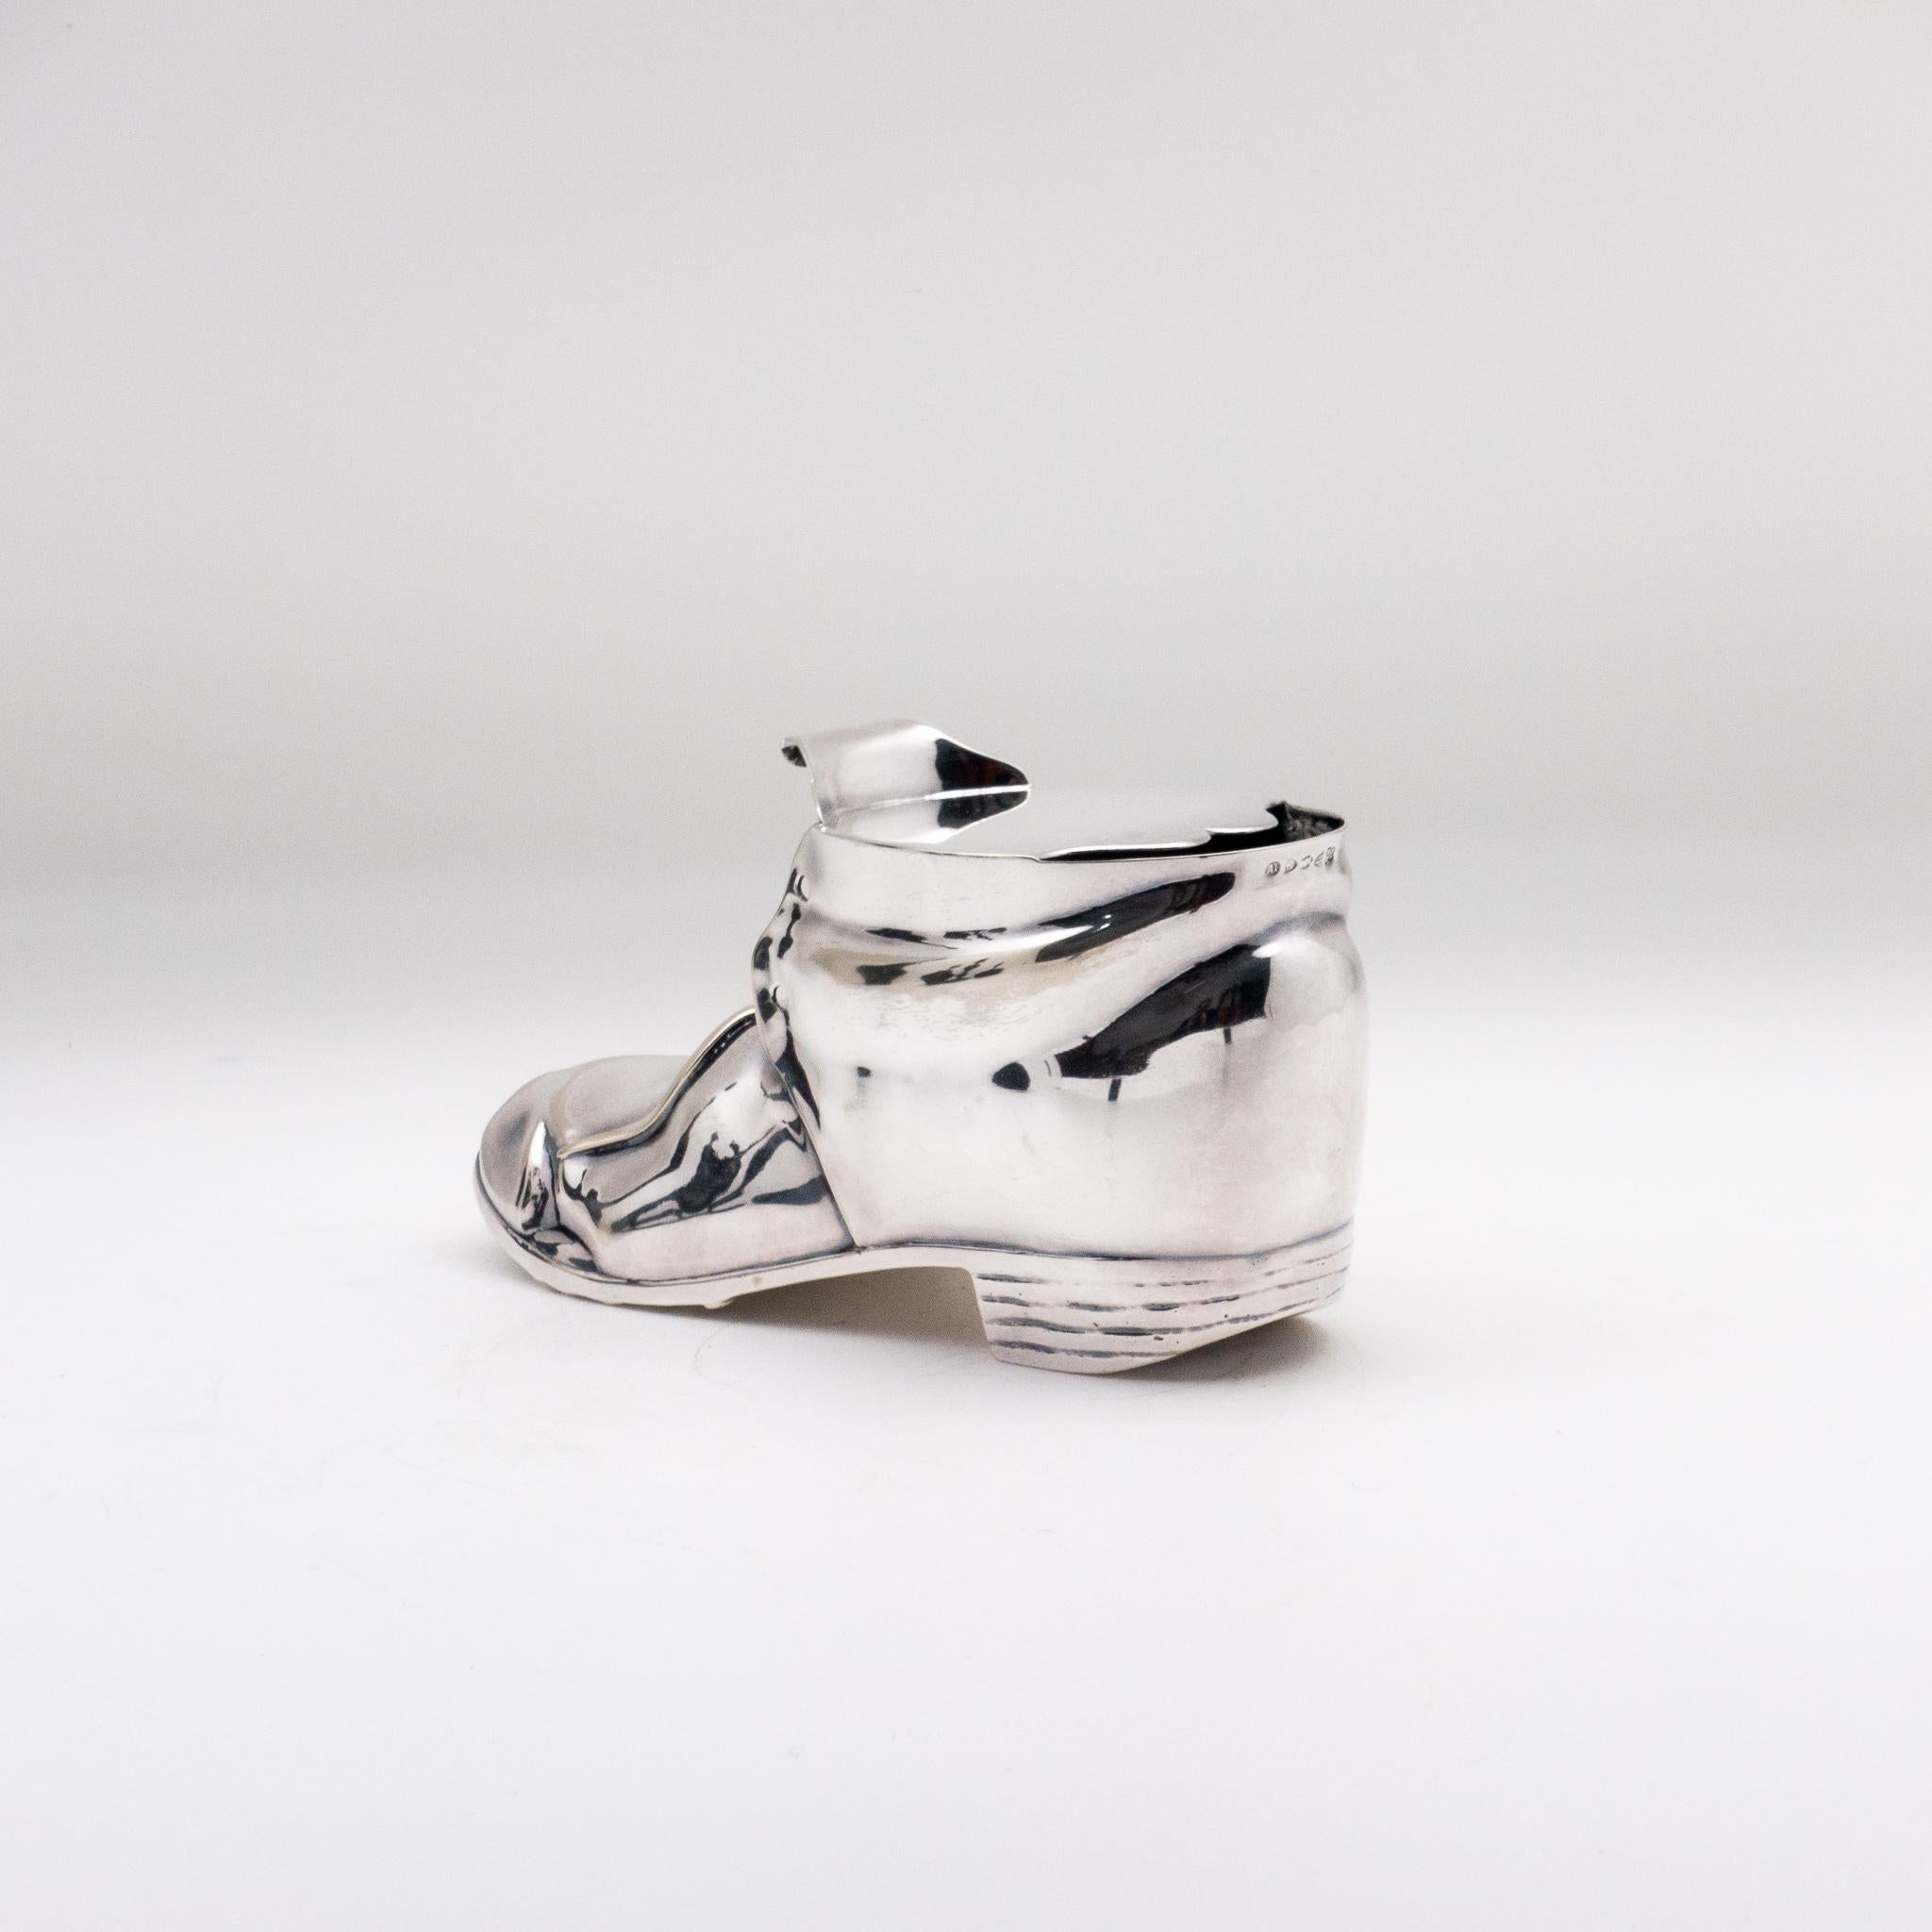 An antique Victorian silver plated spoon warmer, in the shape of a leather shoe. Made by Thomas Latham & Ernest Morton of Birmingham, England.